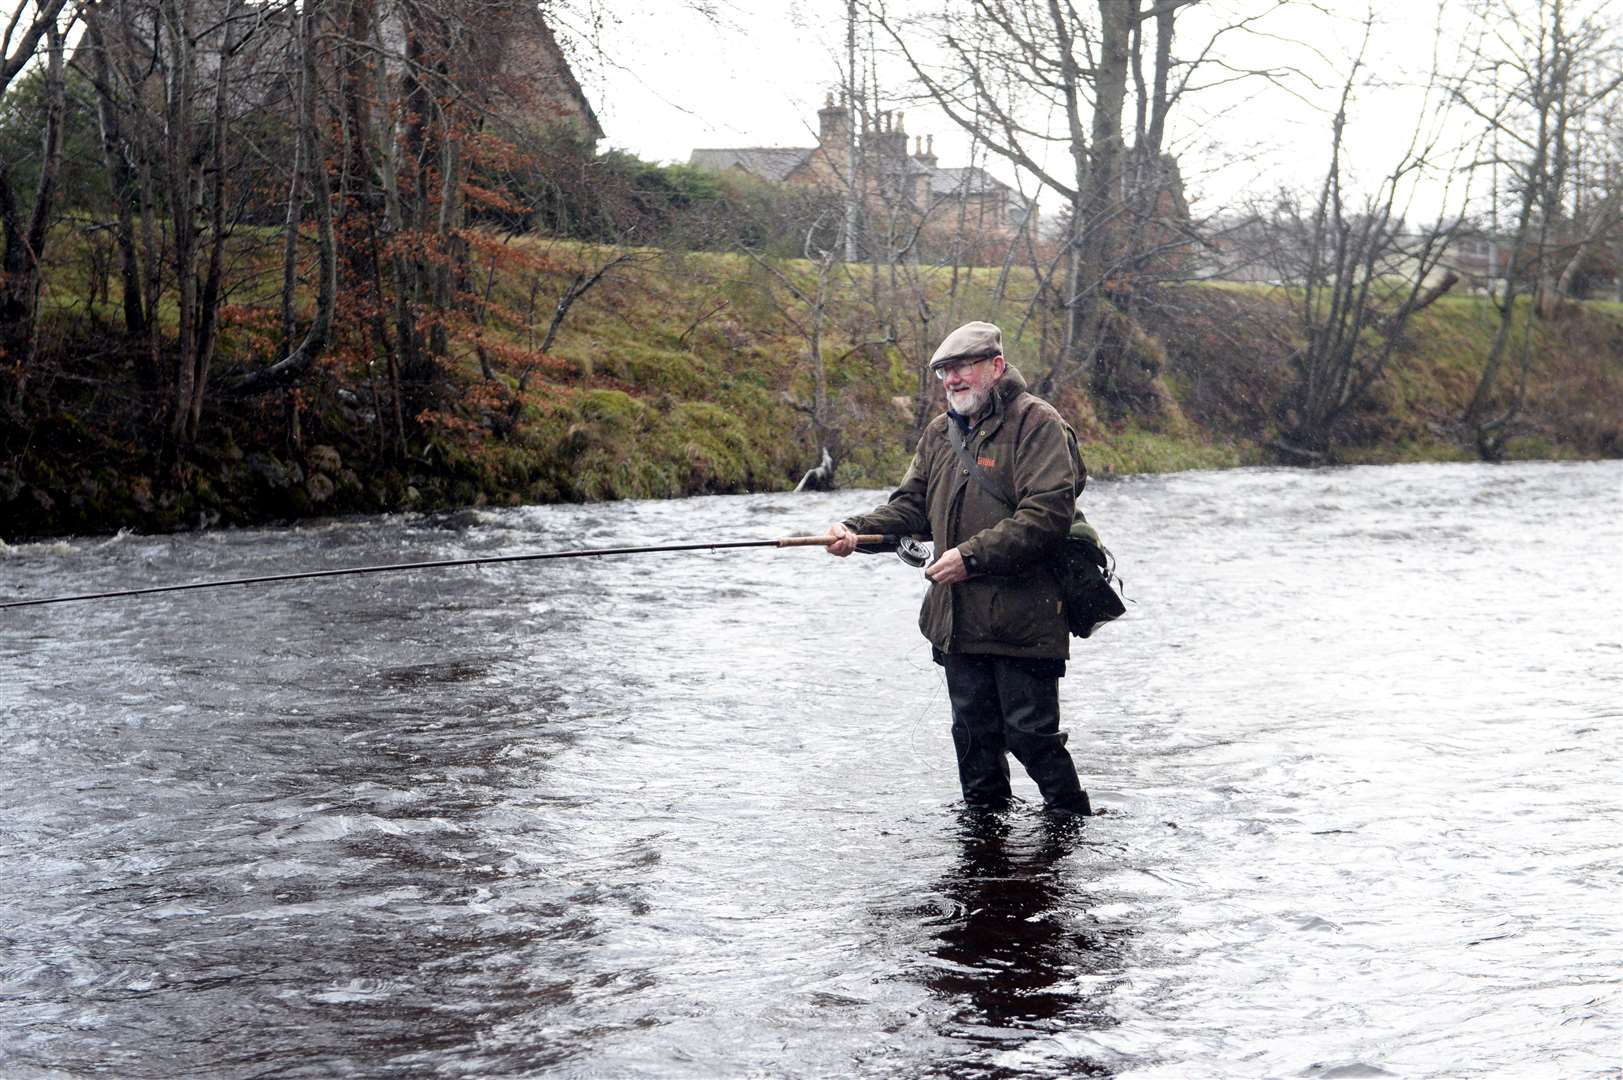 SGA) Fishing Group is hoping for local angling to return in Scotland.